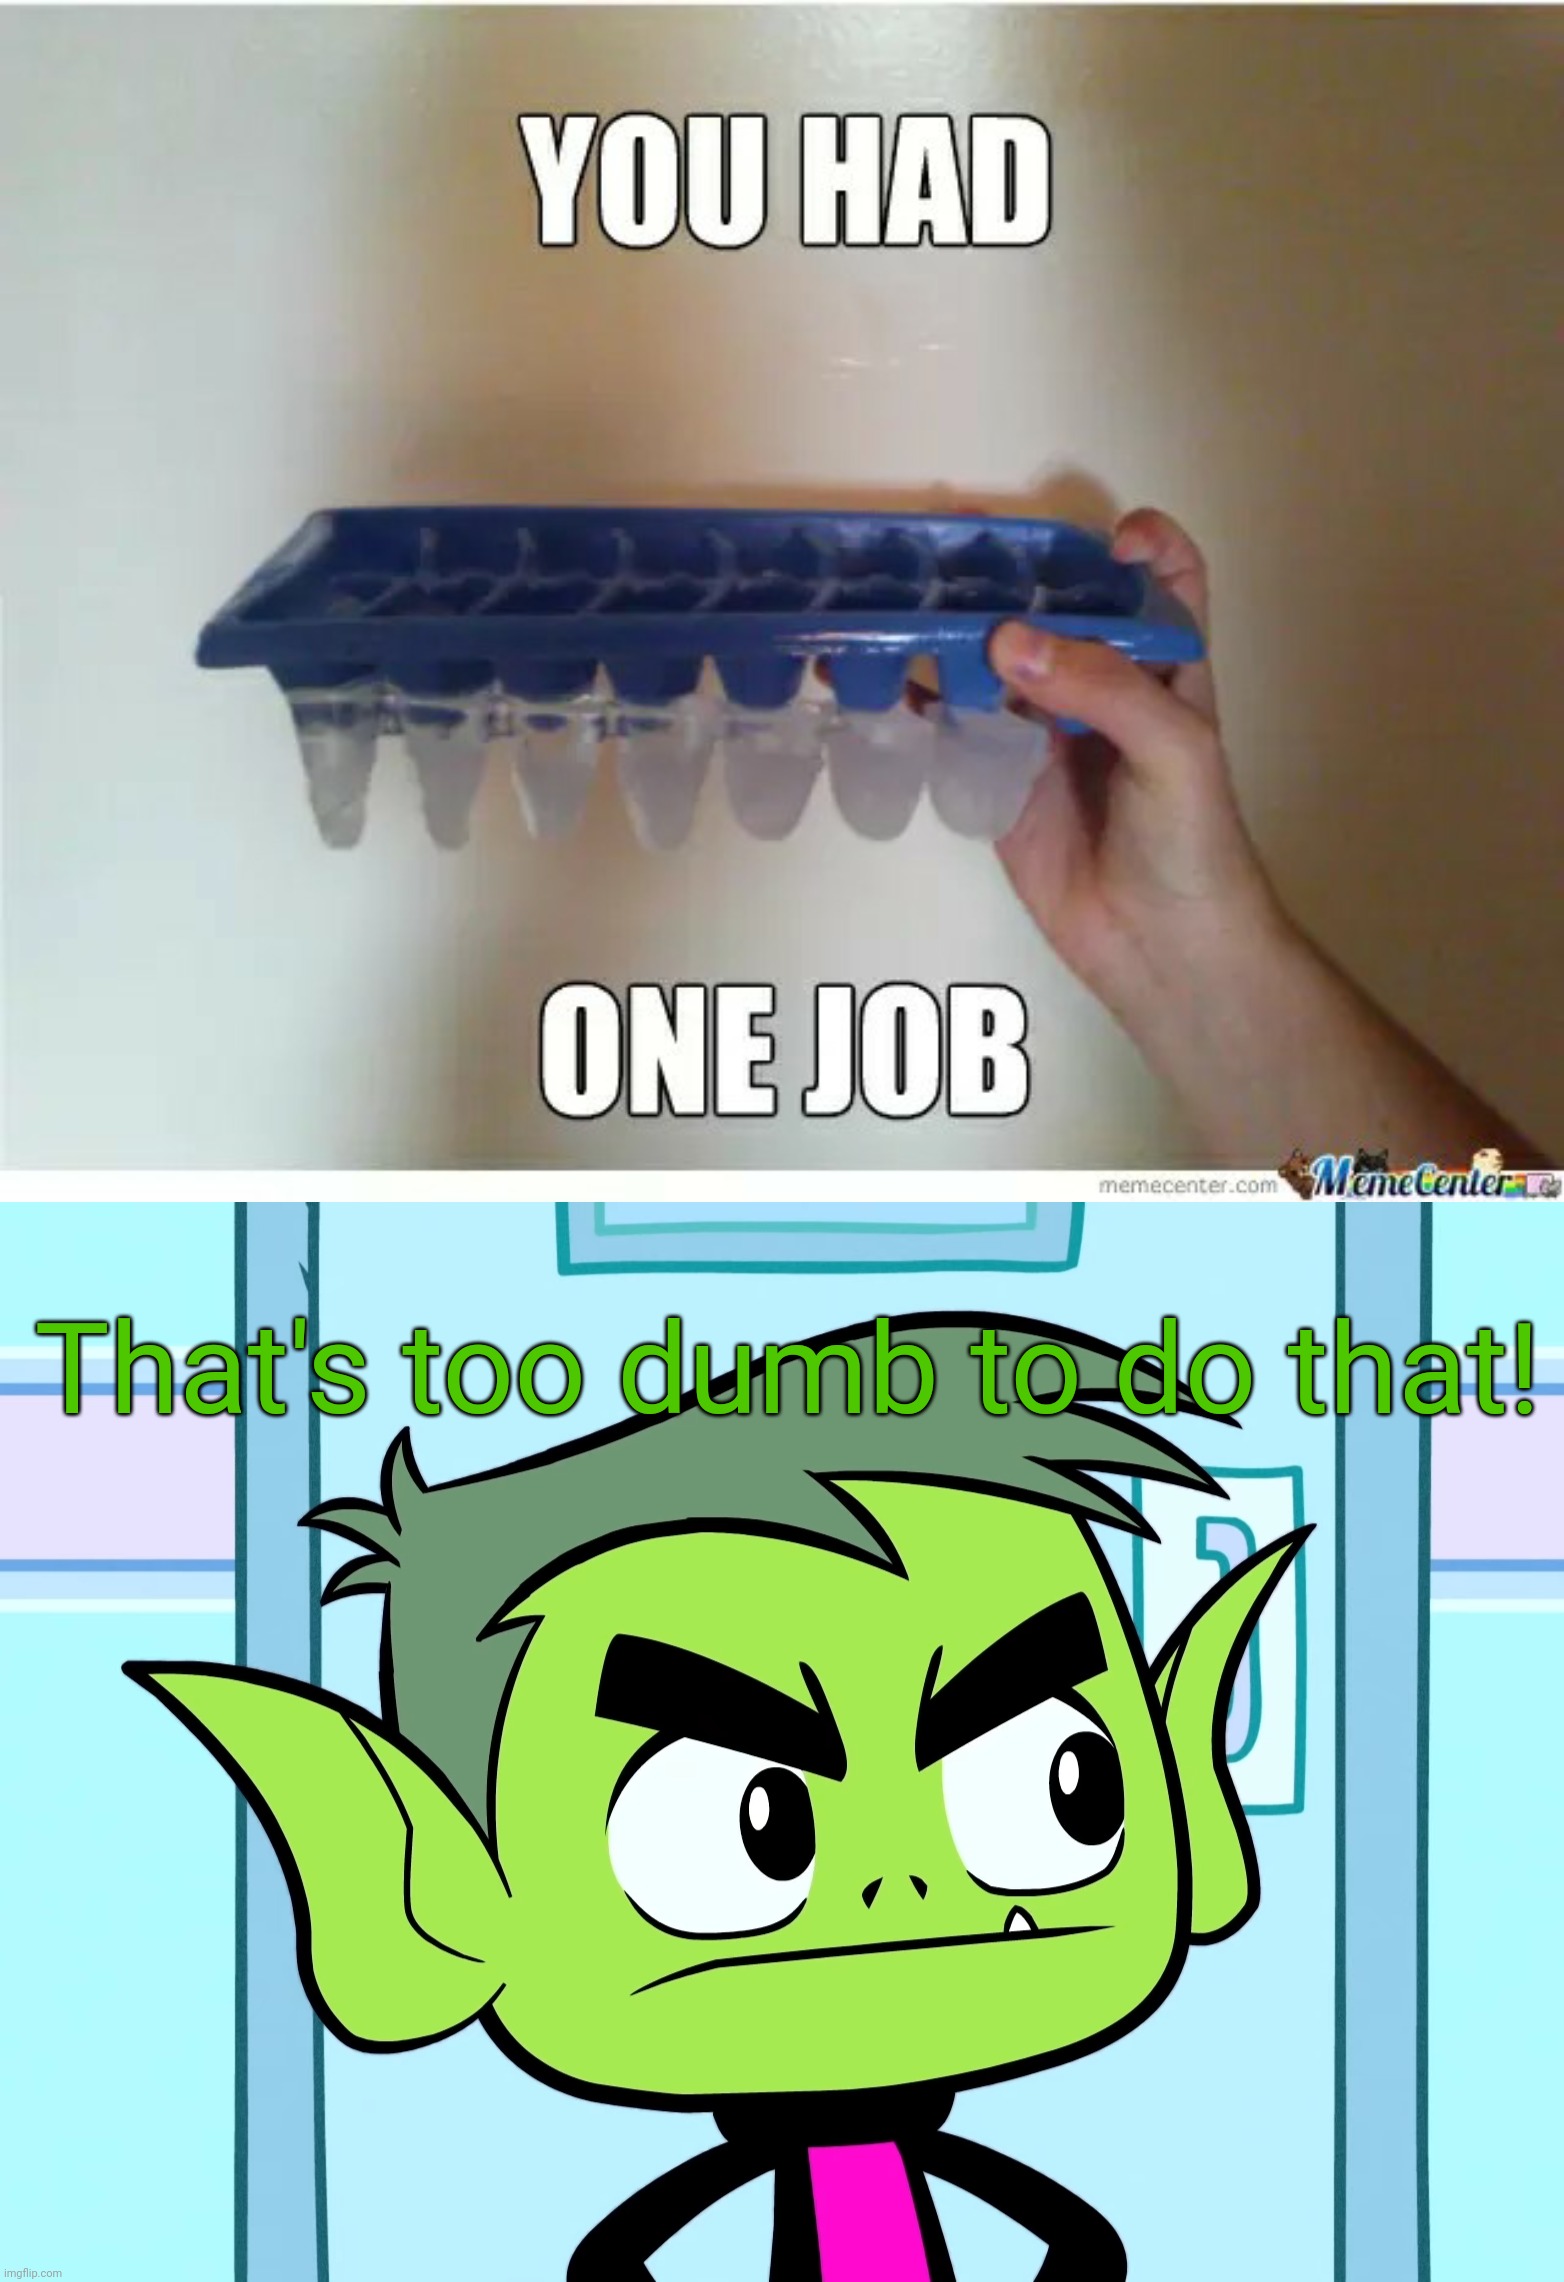 That's too dumb to do that! | image tagged in angry beast boy ttg,funny,memes,fails,task failed successfully,you had one job | made w/ Imgflip meme maker